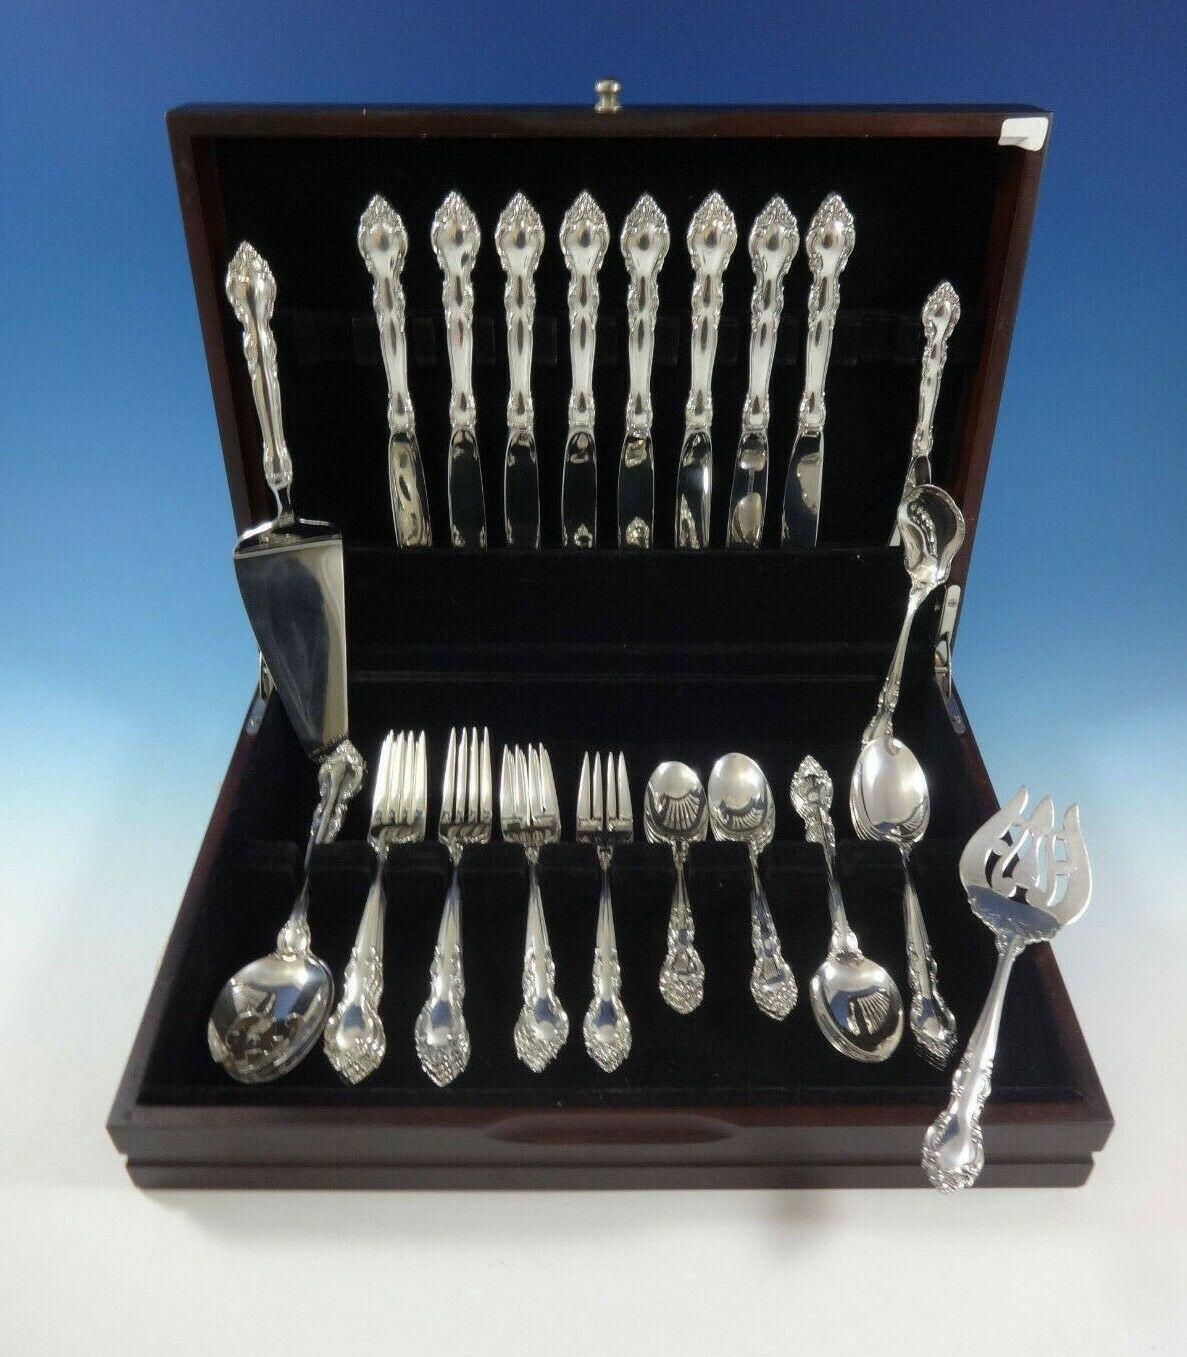 Heirloom quality Malvern by Lunt sterling silver flatware set - 45 pieces. This set includes:

8 knives, 9 1/8